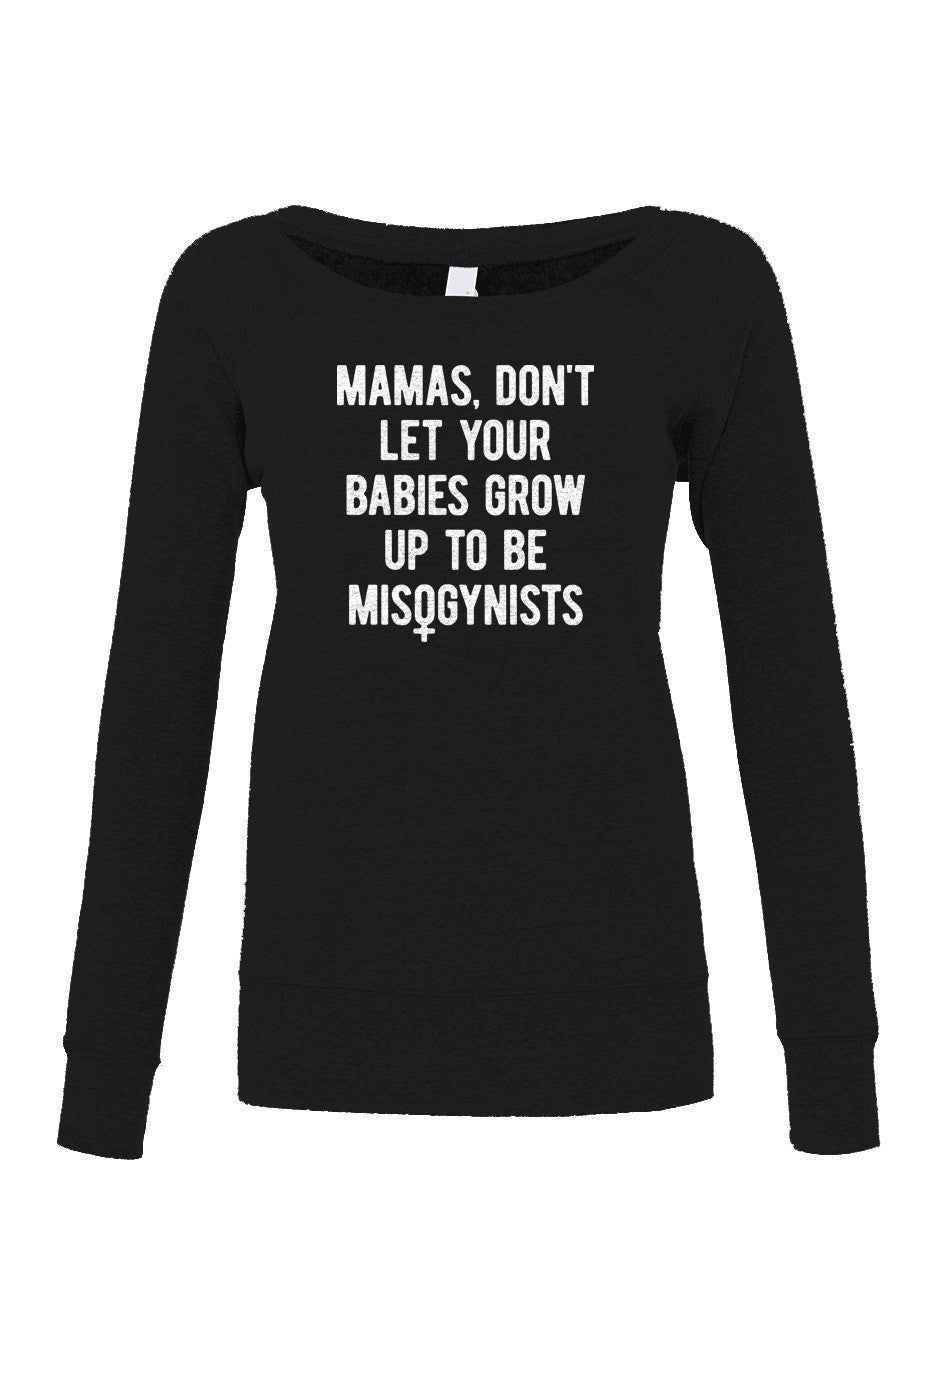 Women's Mamas Don't Let Your Babies Grow Up to be Misogynists Scoop Neck Fleece